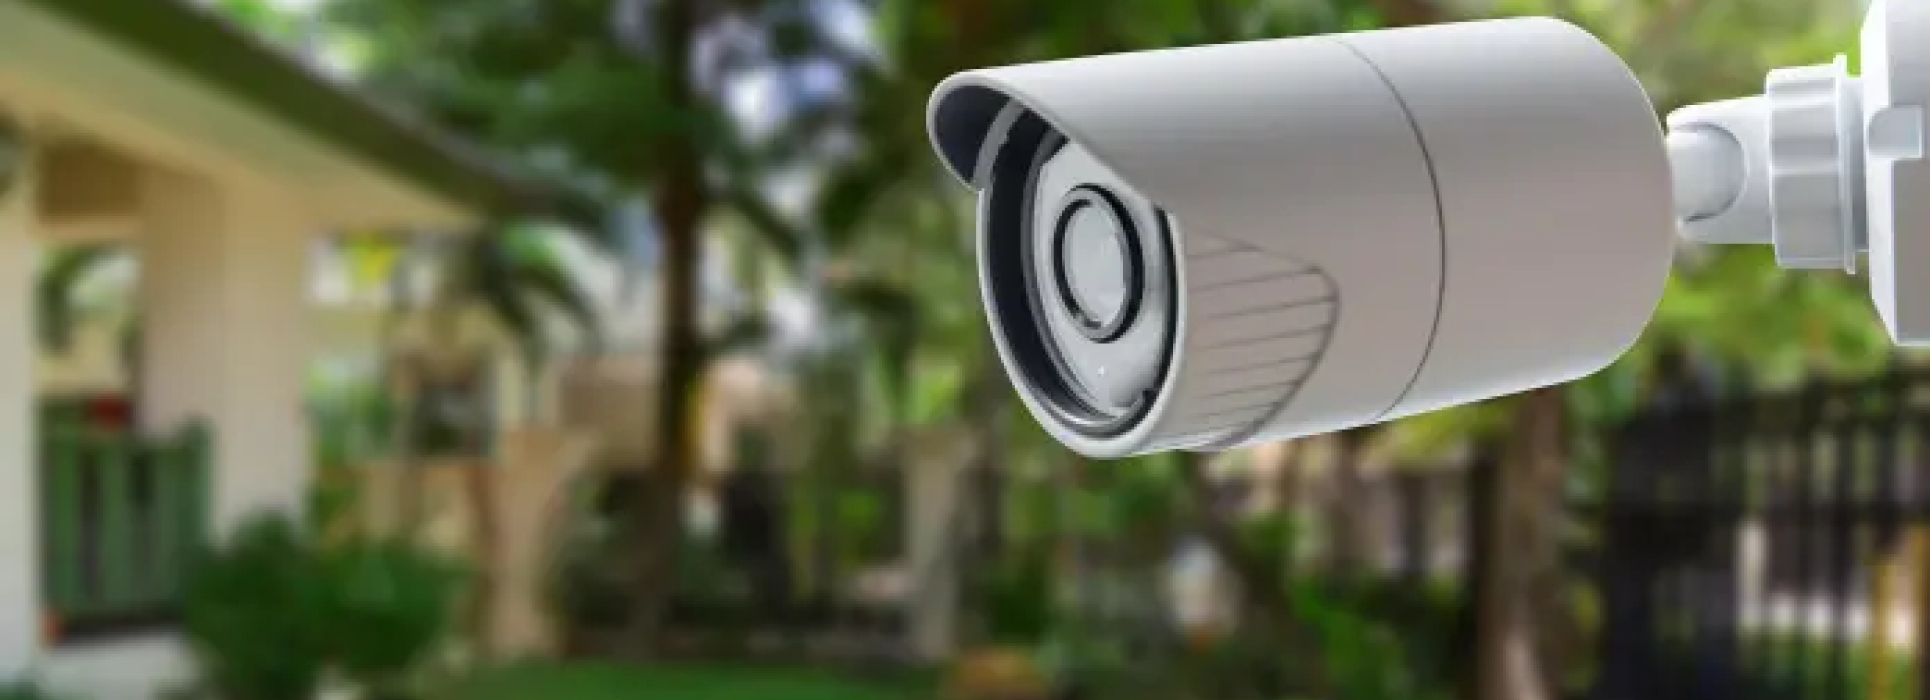 Best Smart Home Security System in 2022